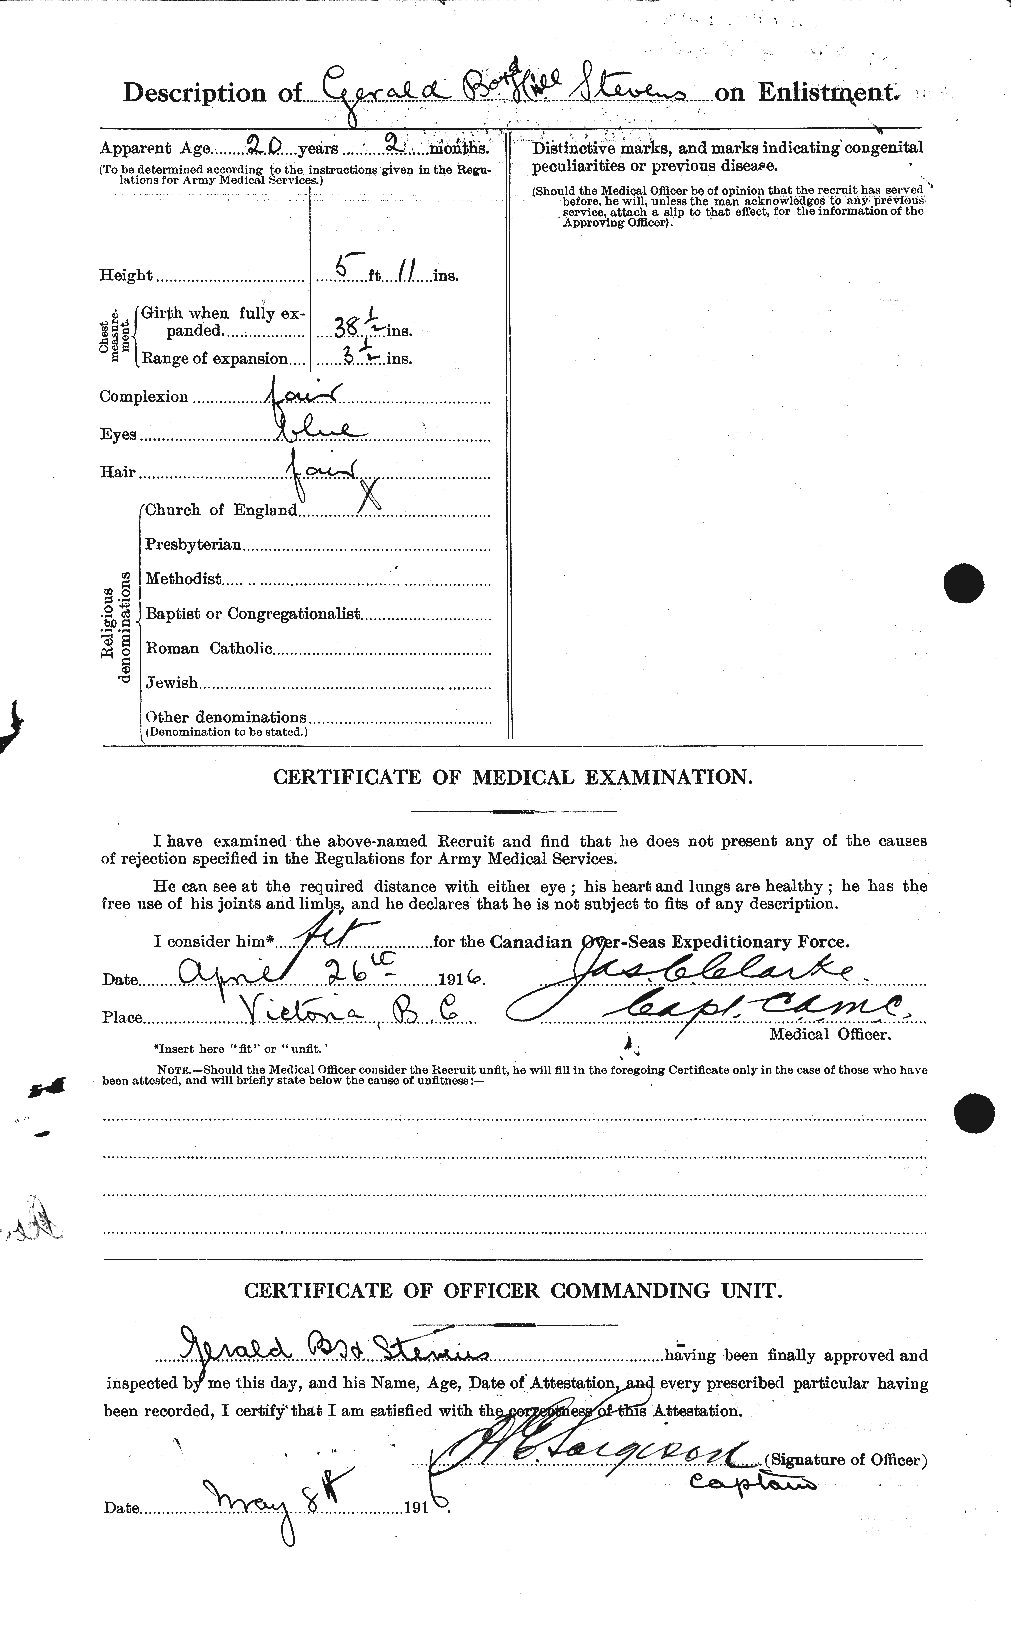 Personnel Records of the First World War - CEF 119576b